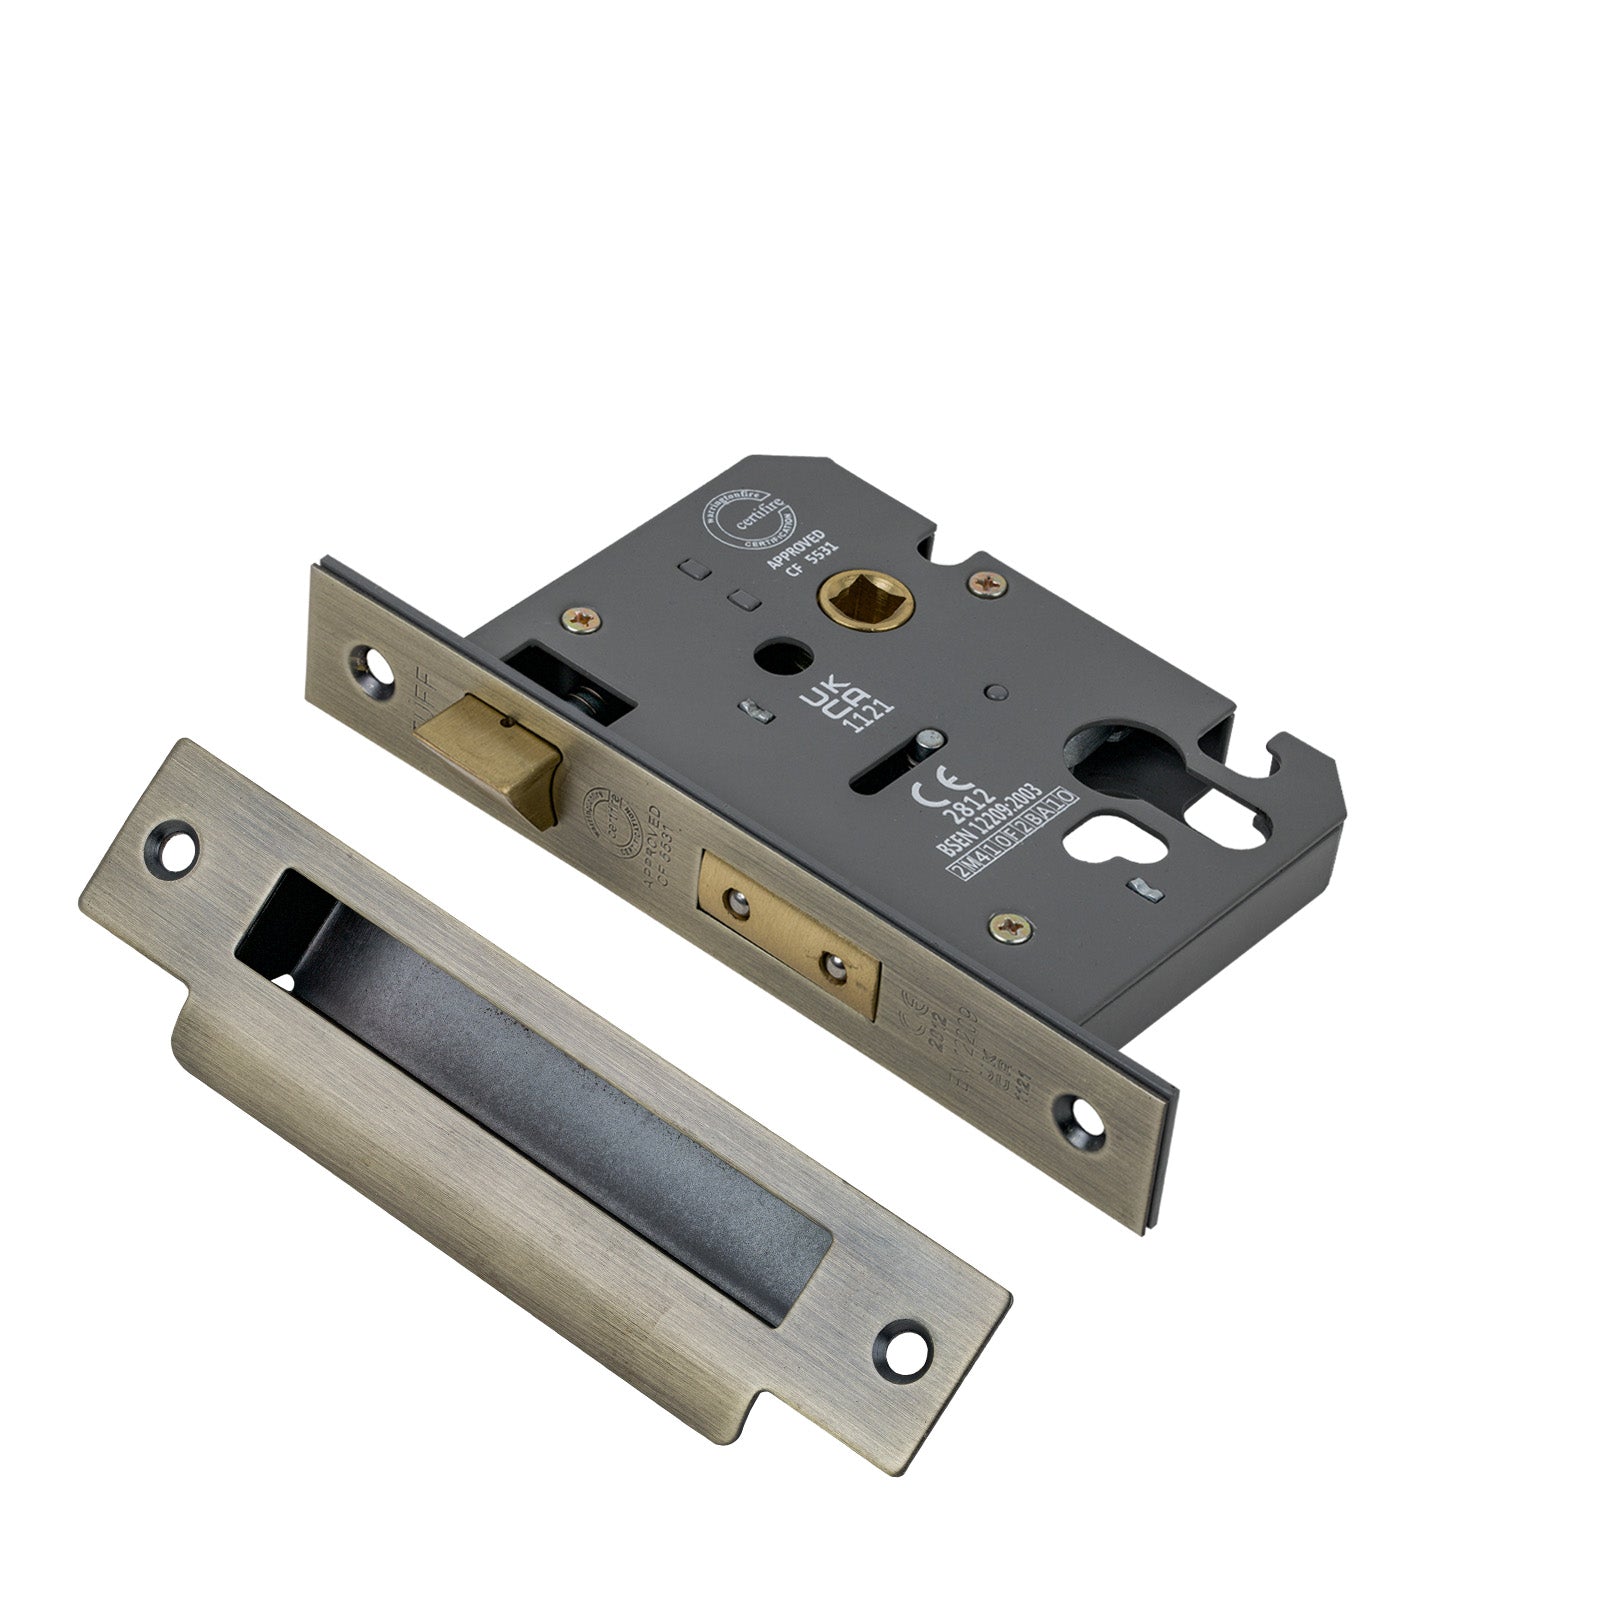 SHOW 3 Lever Euro Sash Lock - 3 Inch with Matt Antique Brass finished forend and striker plate